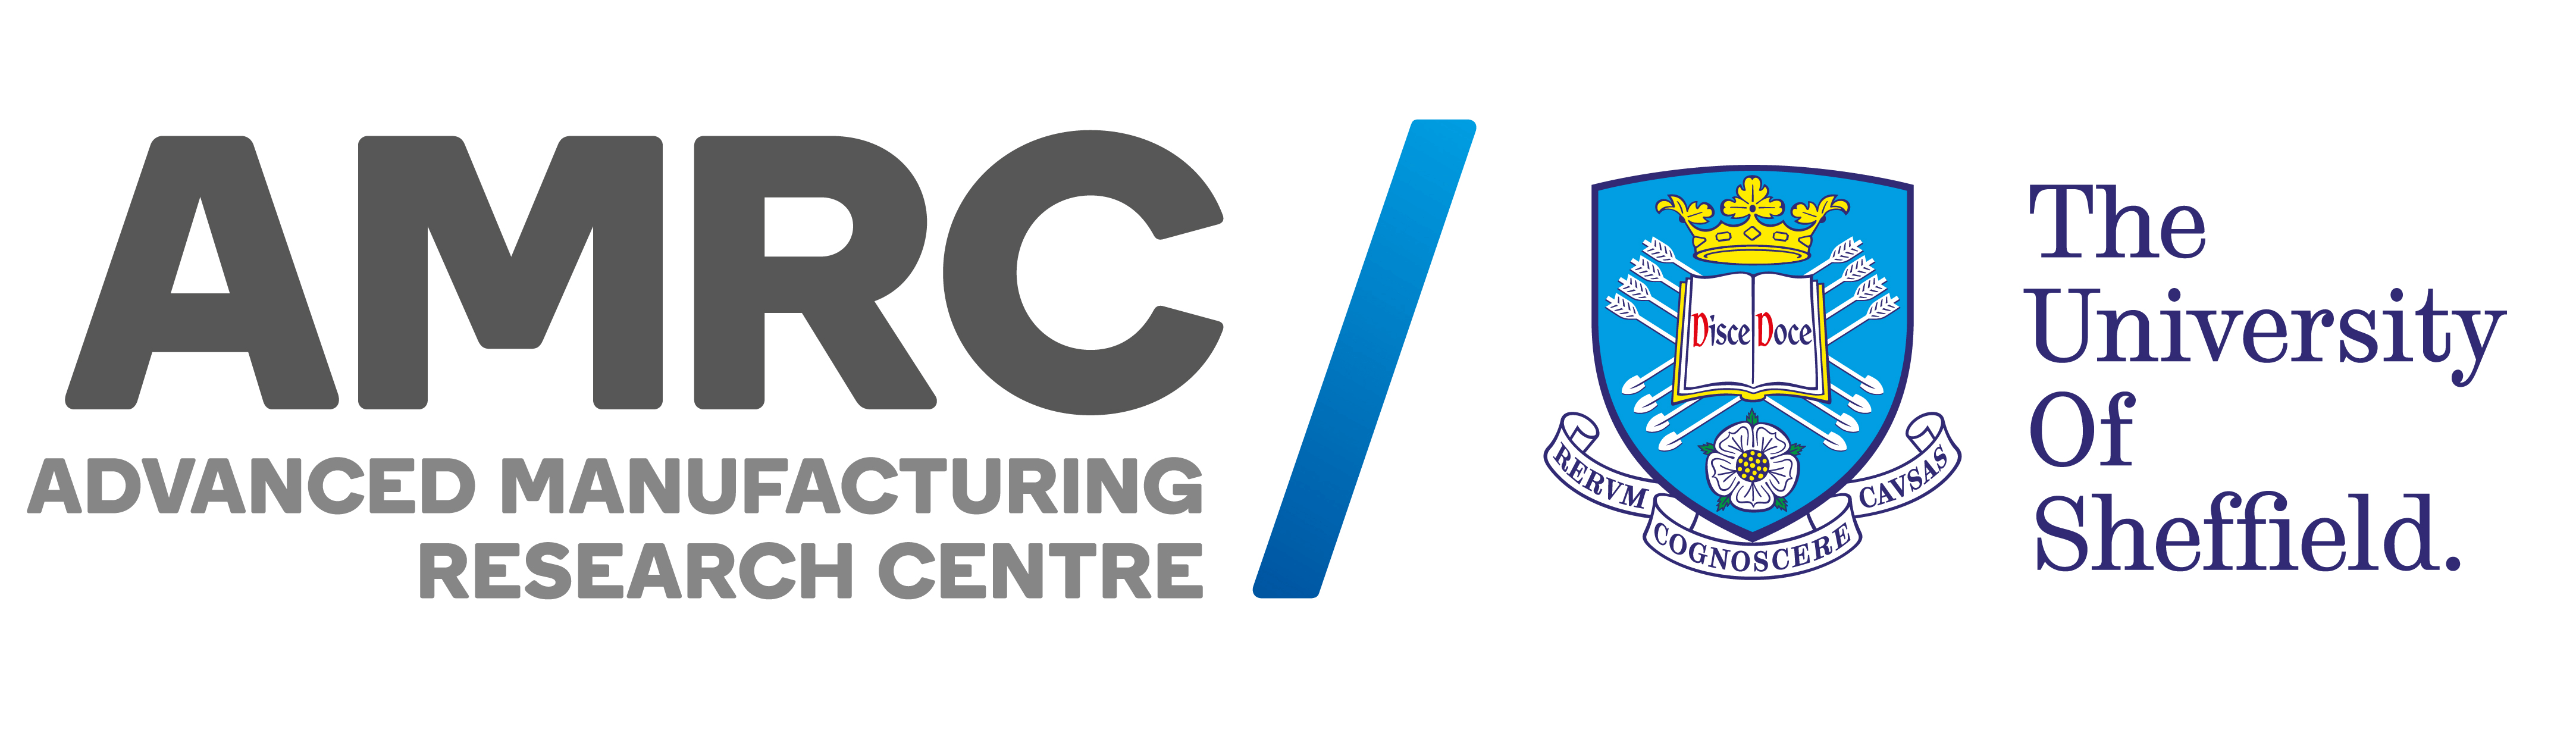 Boeing Company Logo - AMRC - The University of Sheffield Advanced Manufacturing Research ...